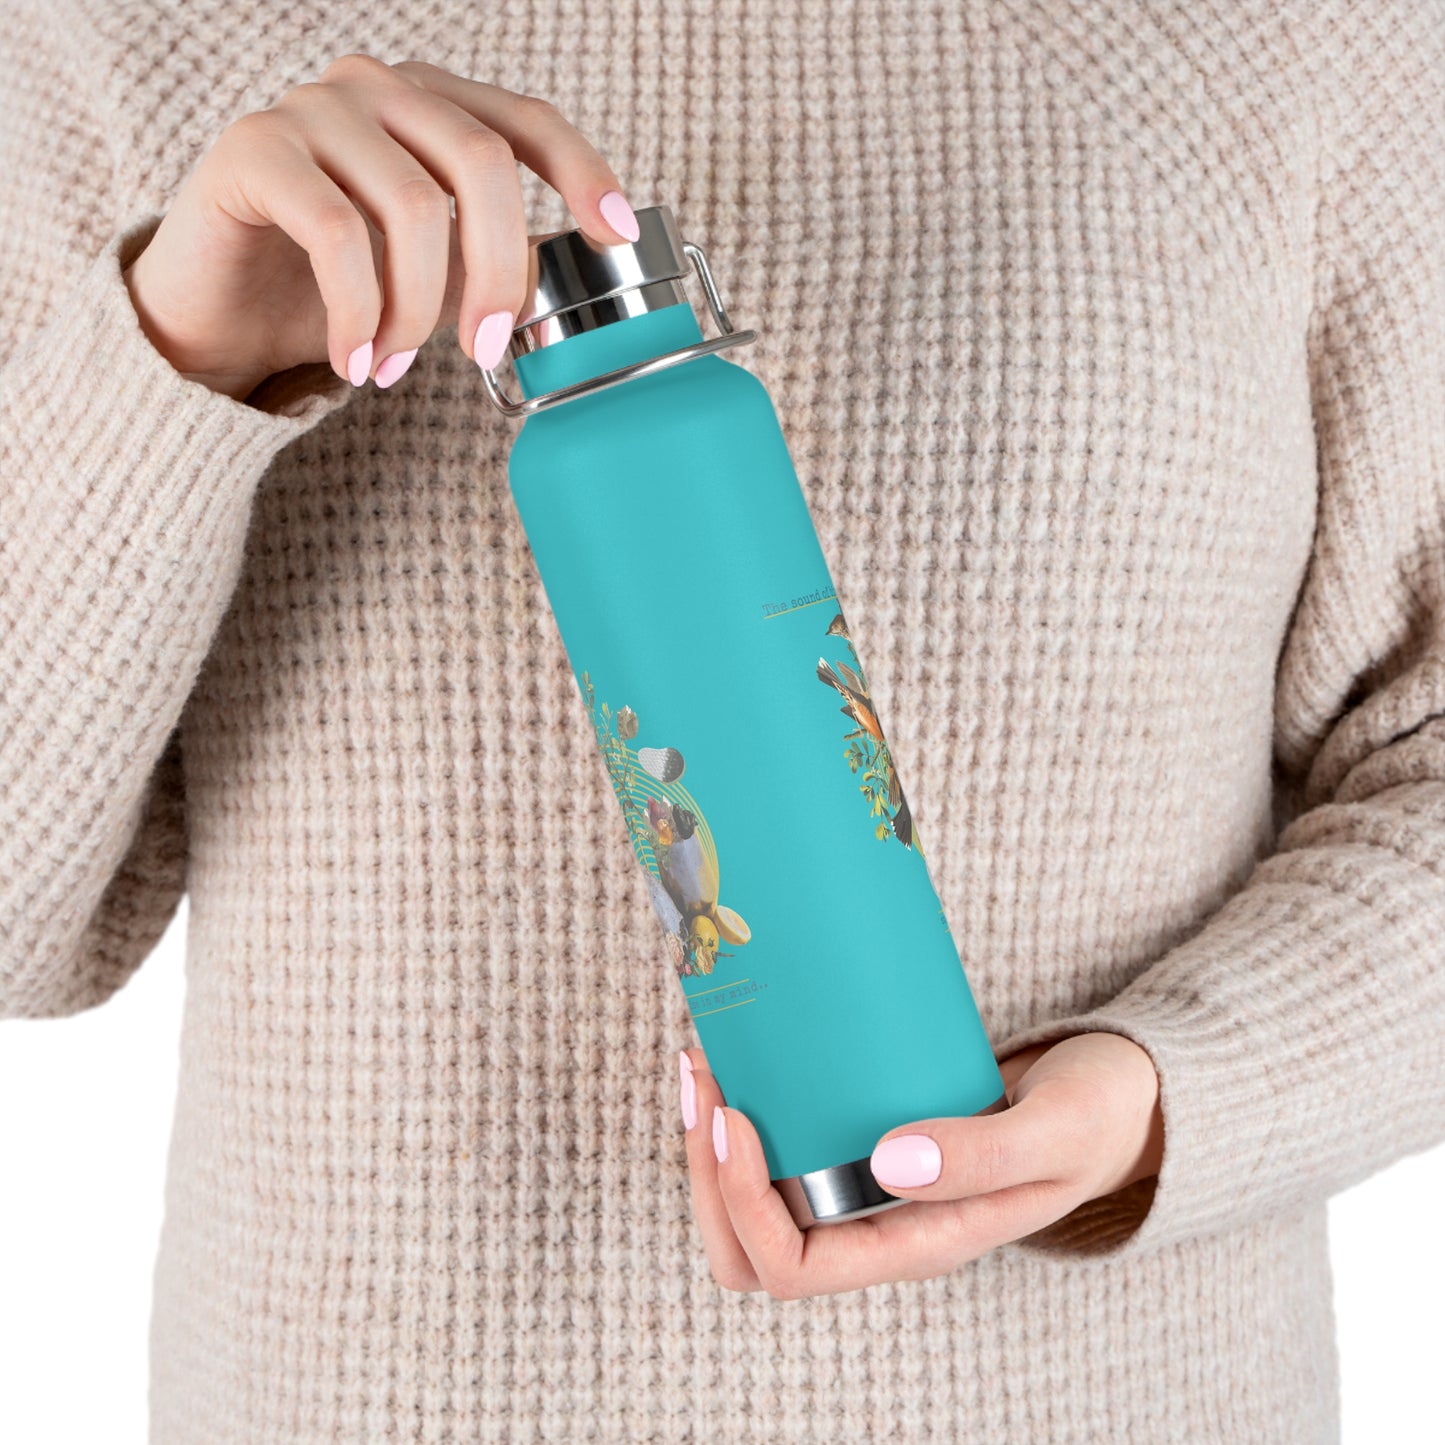 "The sound of  birds stops the noise in my mind" Copper Vacuum Insulated Bottle, 22oz